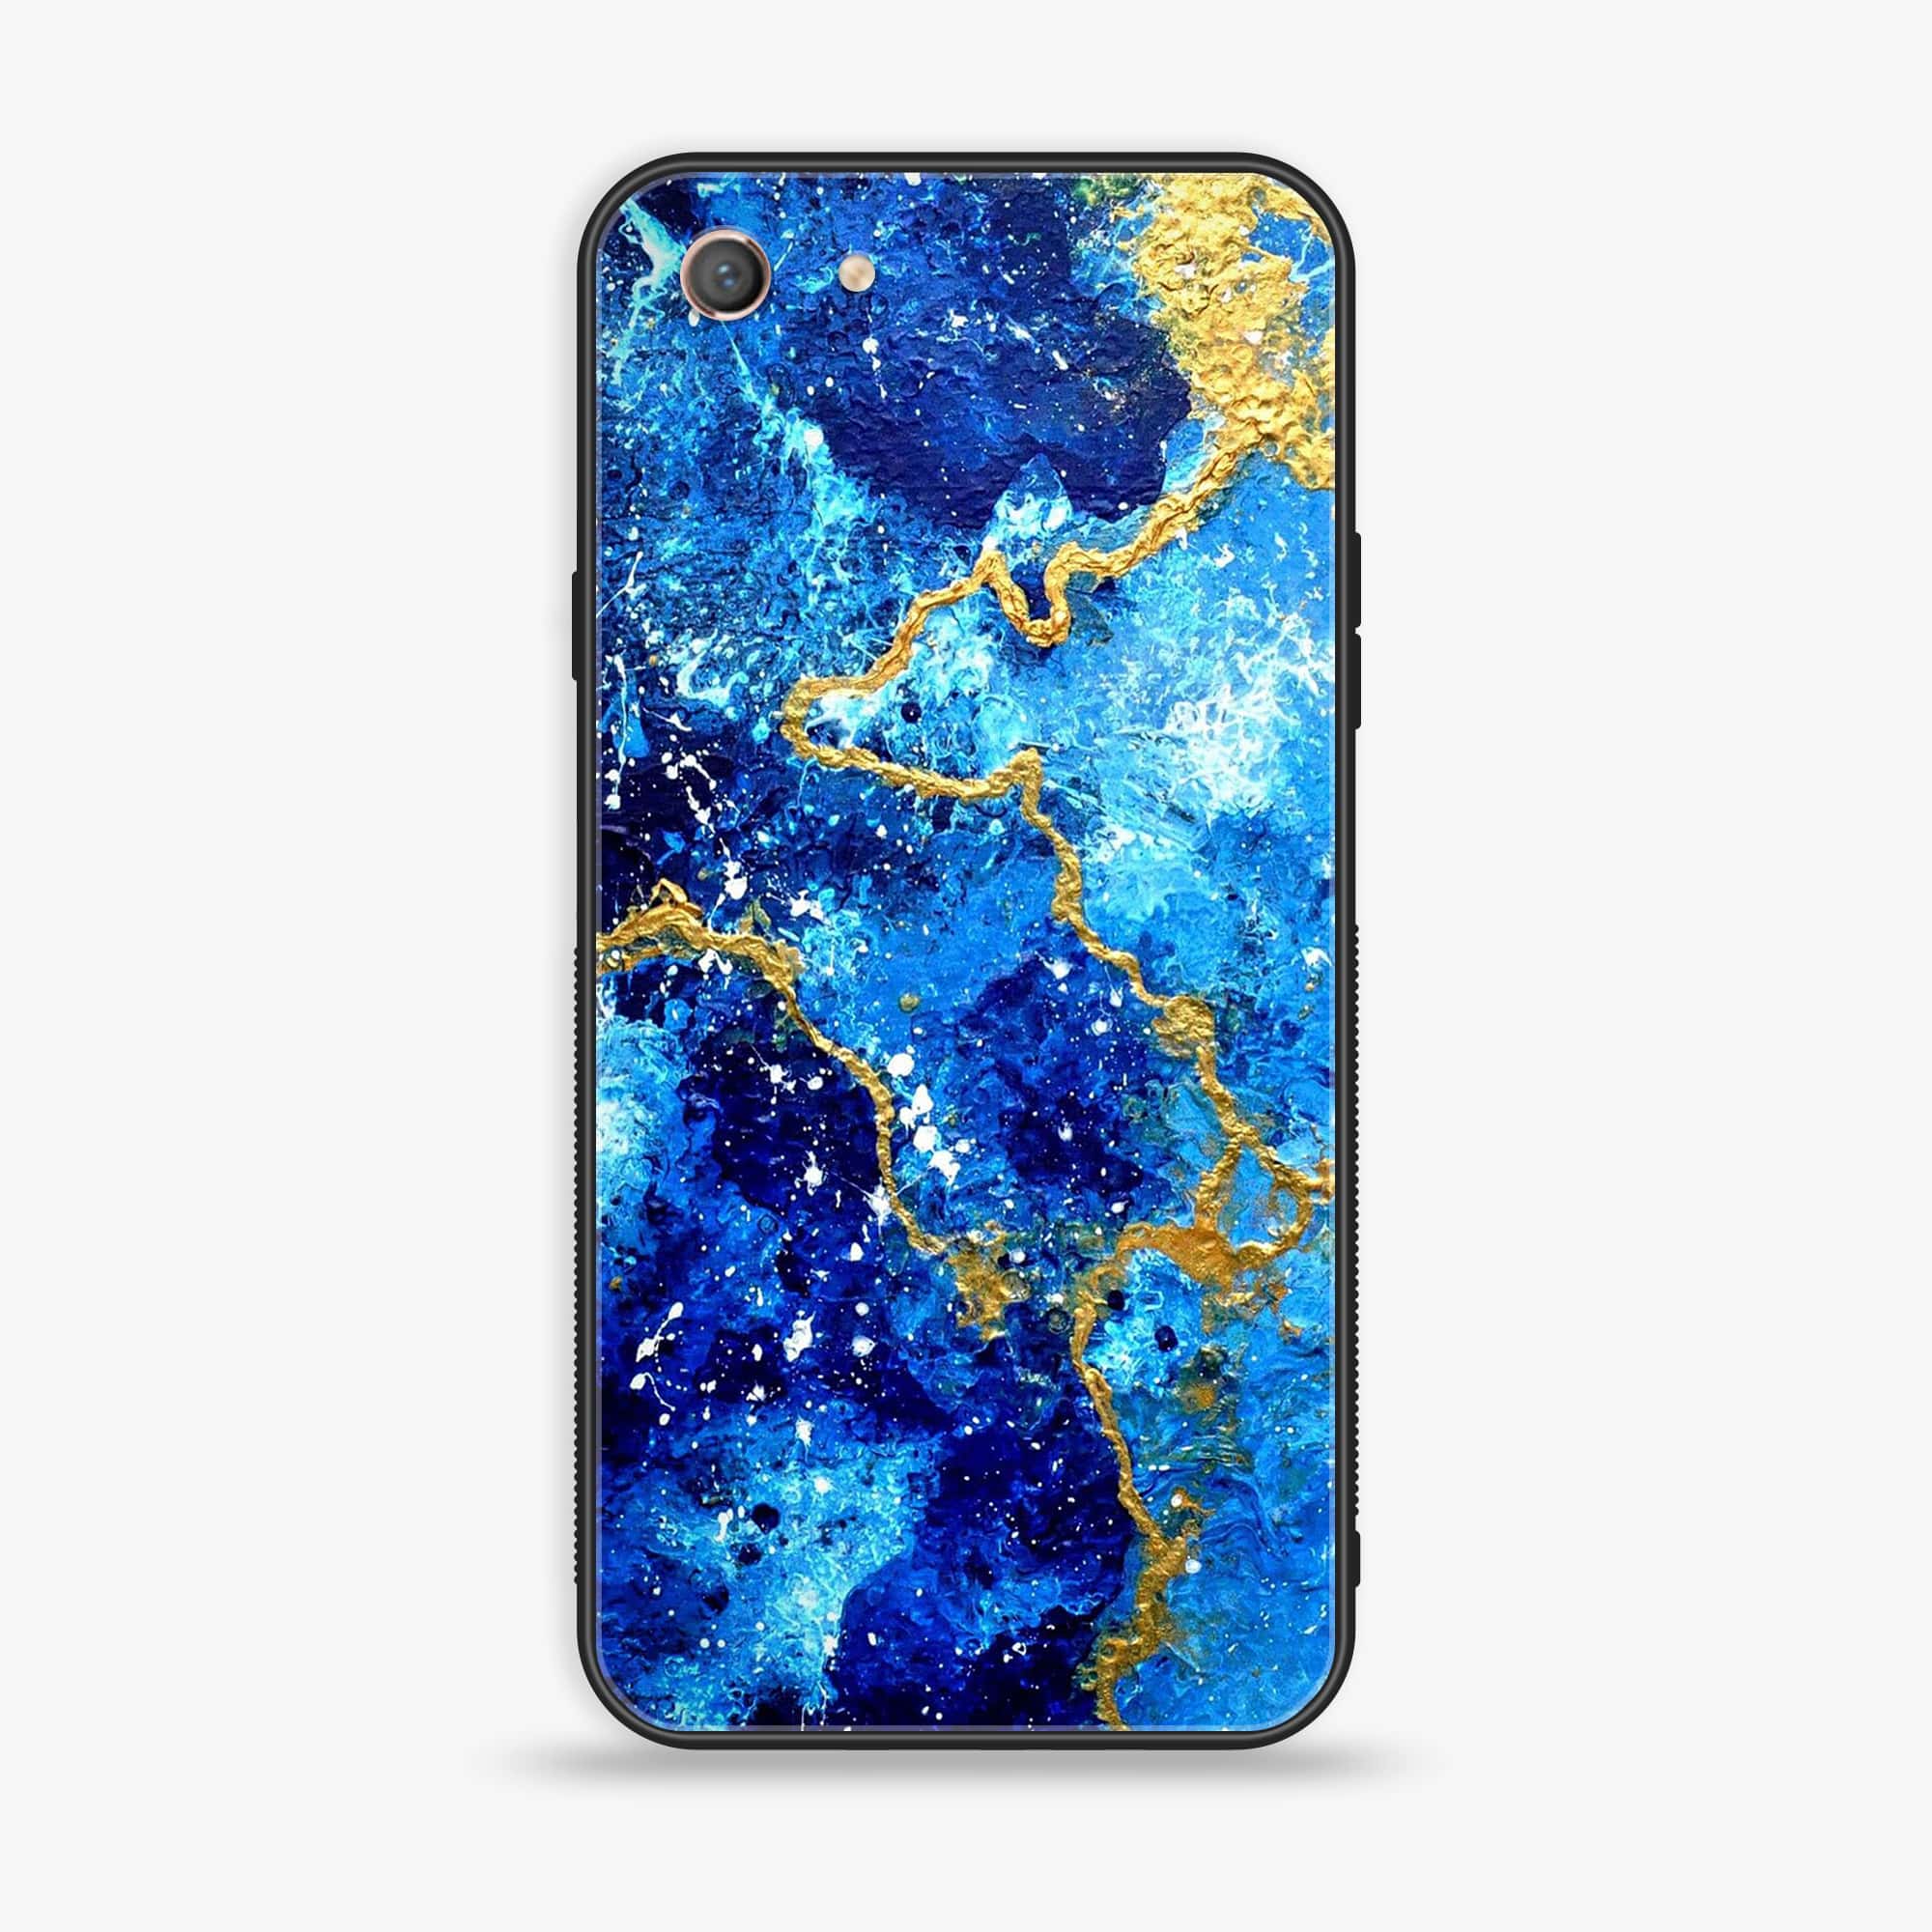 Oppo A71 (2018) - Blue Marble 2.0 Series - Premium Printed Glass soft Bumper shock Proof Case